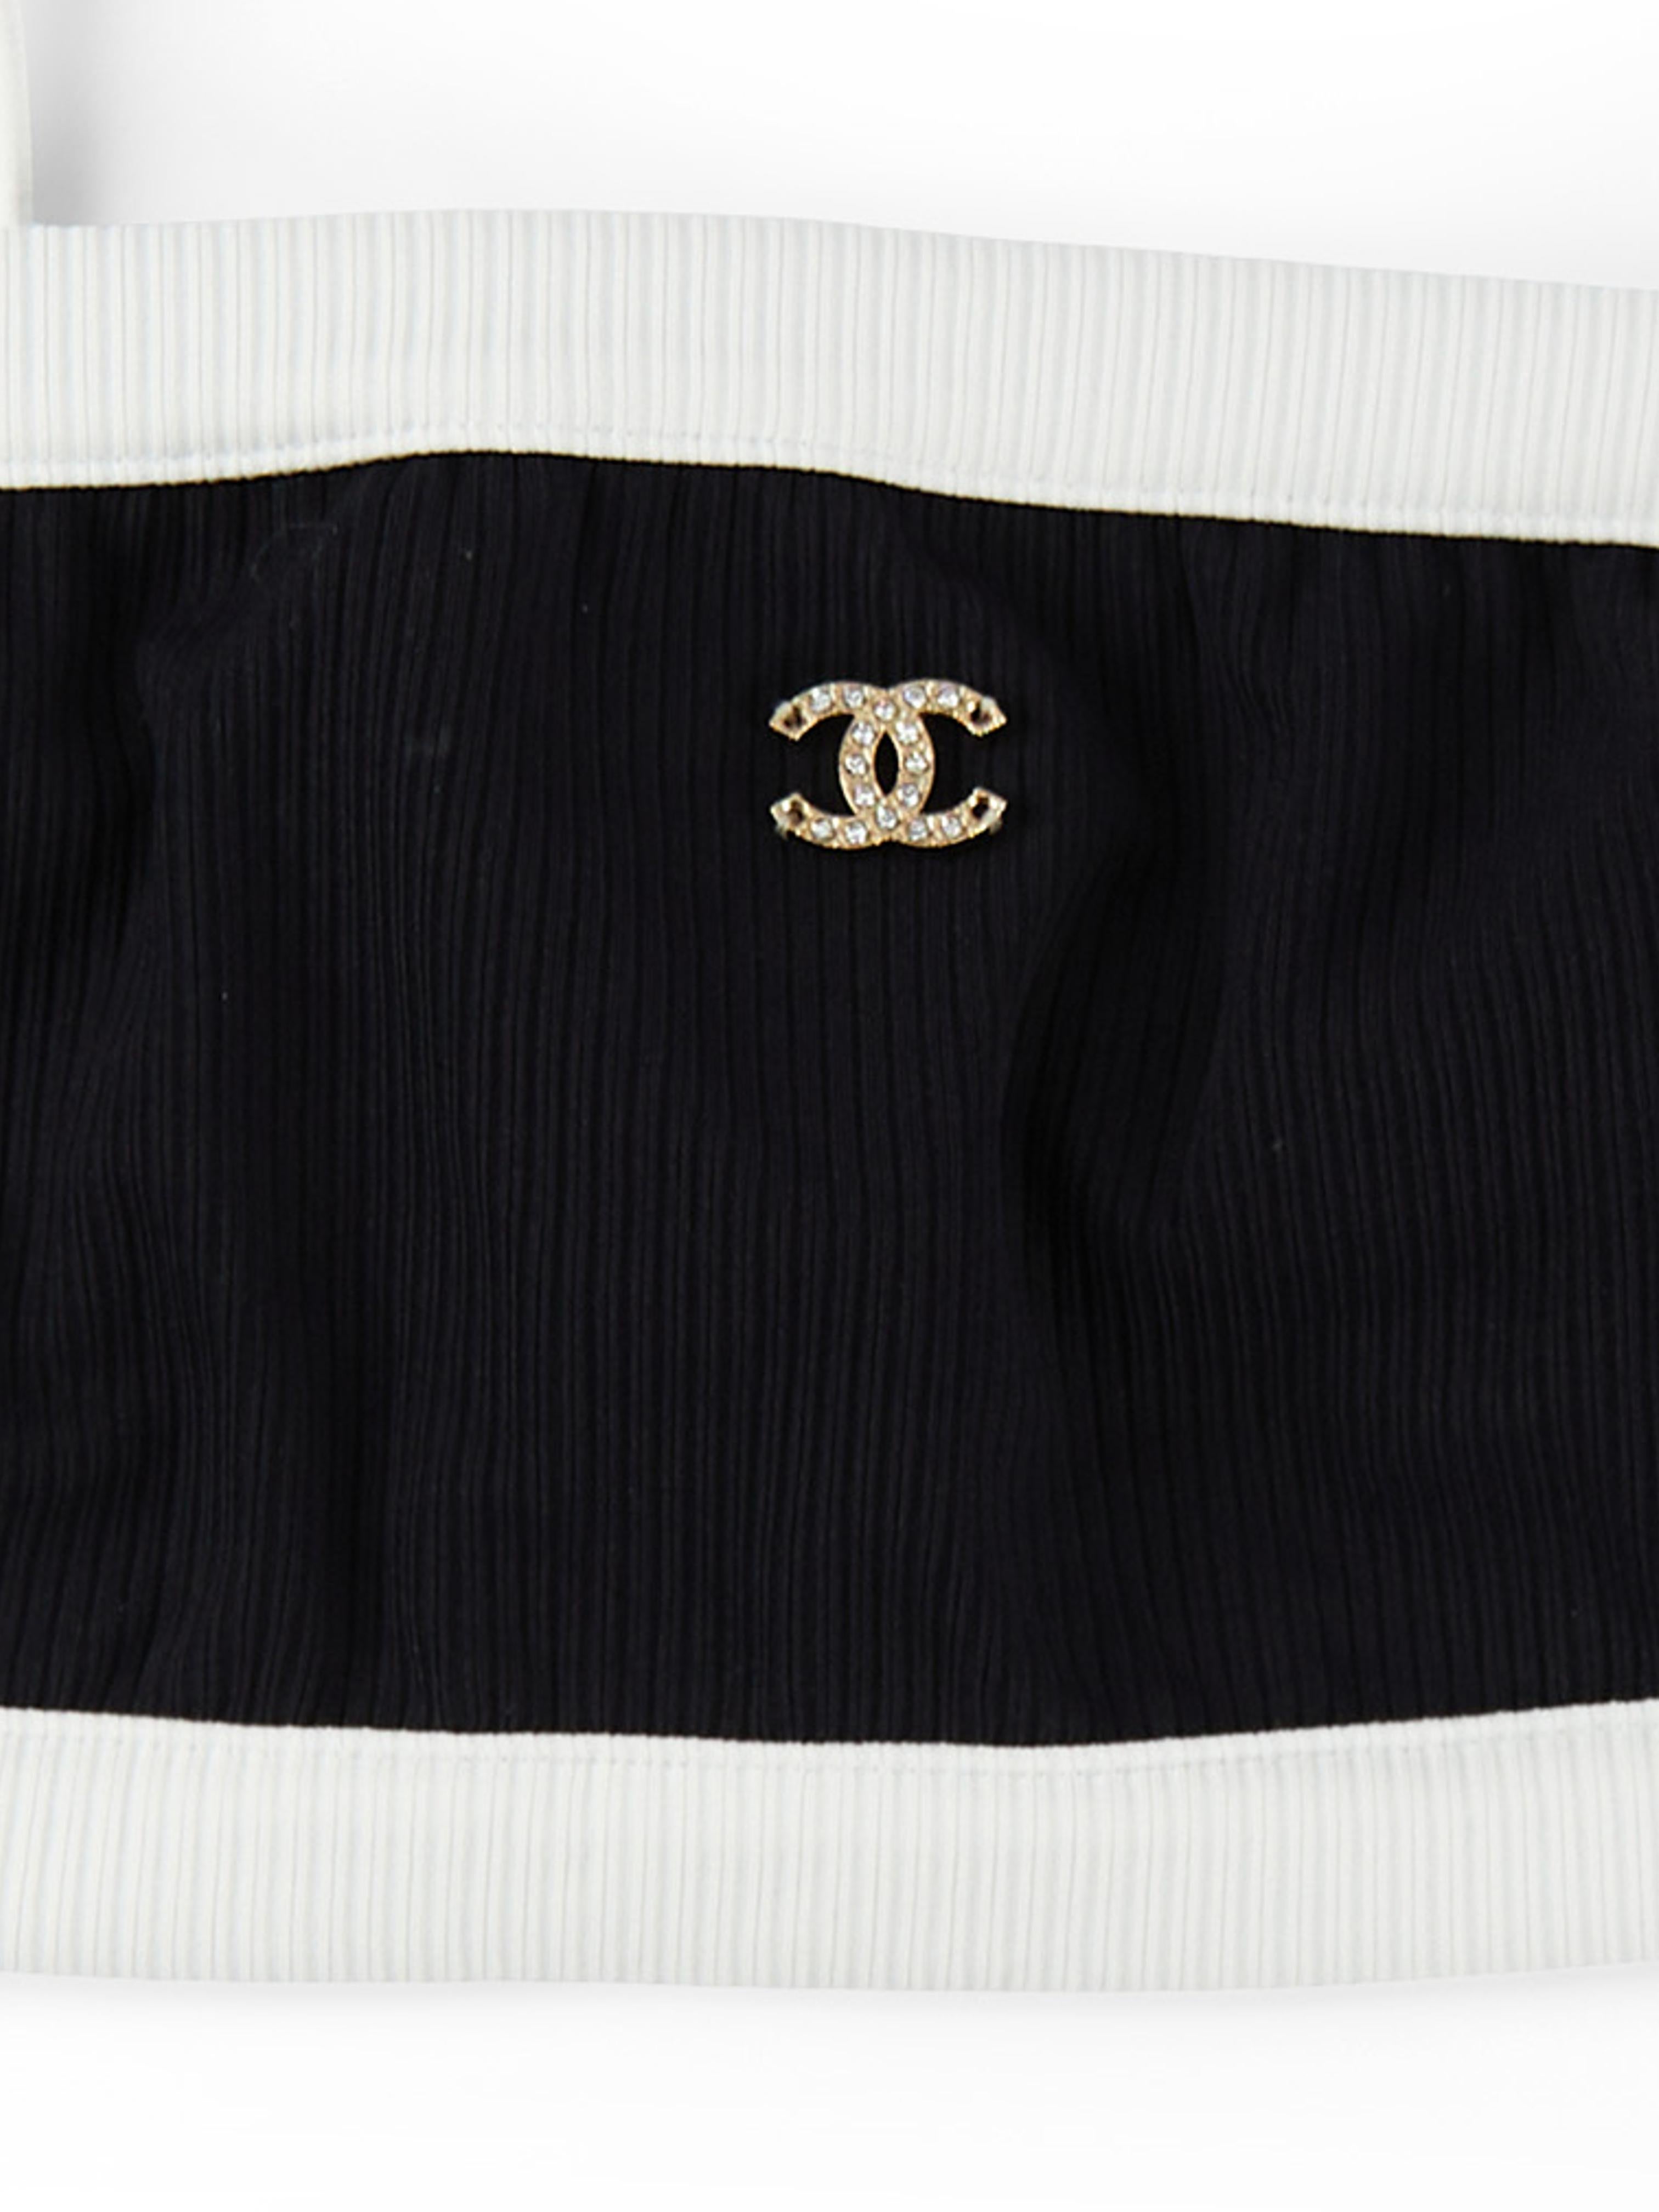 Chanel Ribbed Swimsuit Top in Black and White 

Ribbed Stretched Jersey

Rhinestone CC Logo 

Size 36

Accompanied by: Chanel dust bag (no box)



